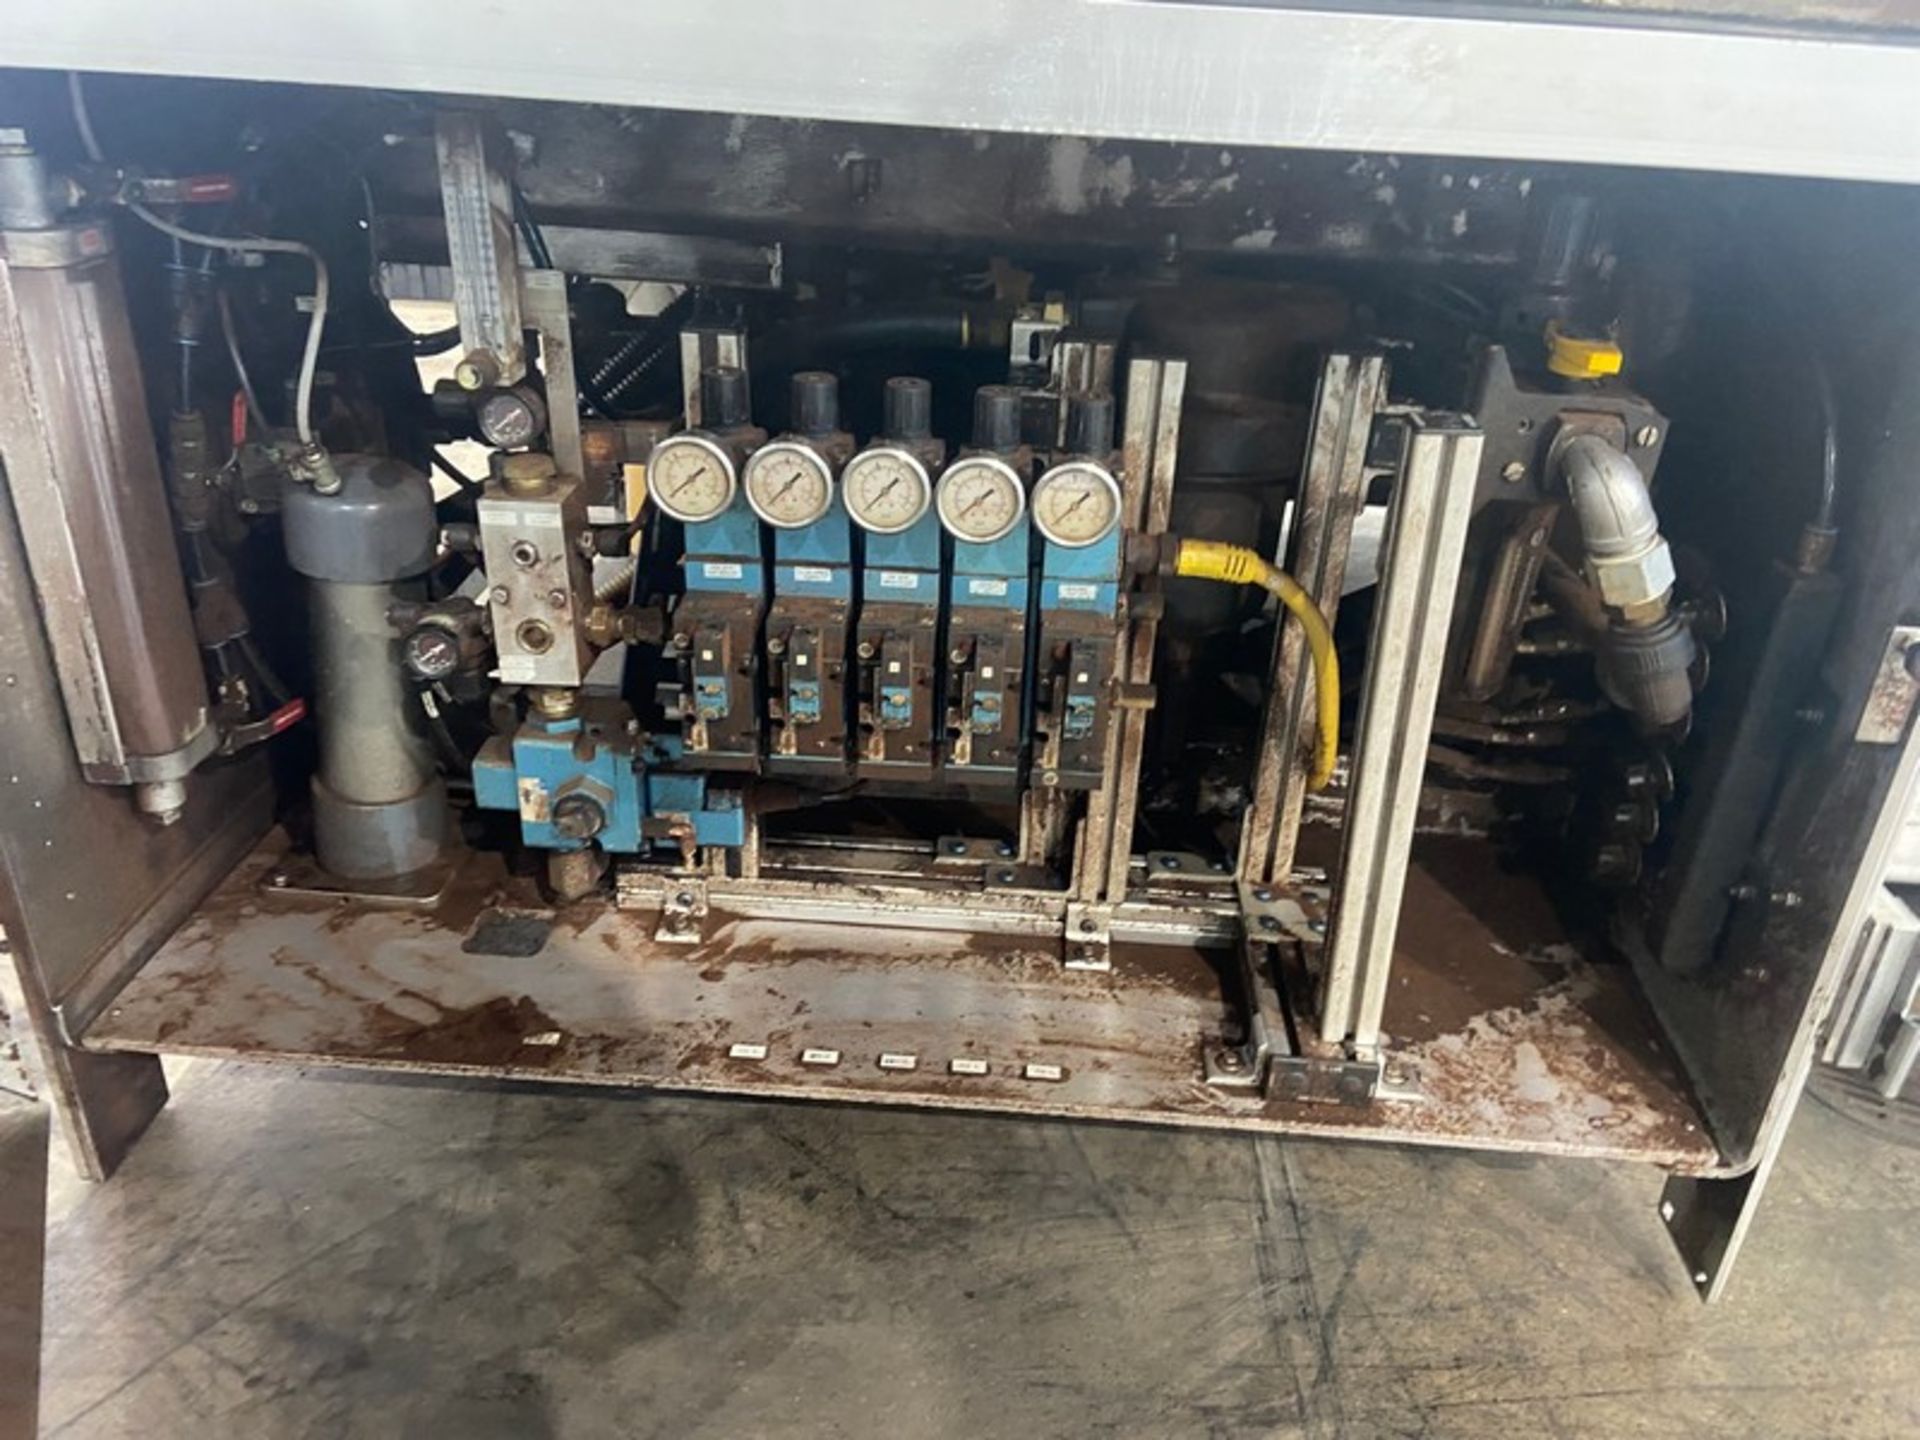 R.A. Jones Pouch King Pouch Filler,M/N S-6042, S/N S-6042, 460 Volts, 3 Phase, with On Board Control - Image 13 of 19